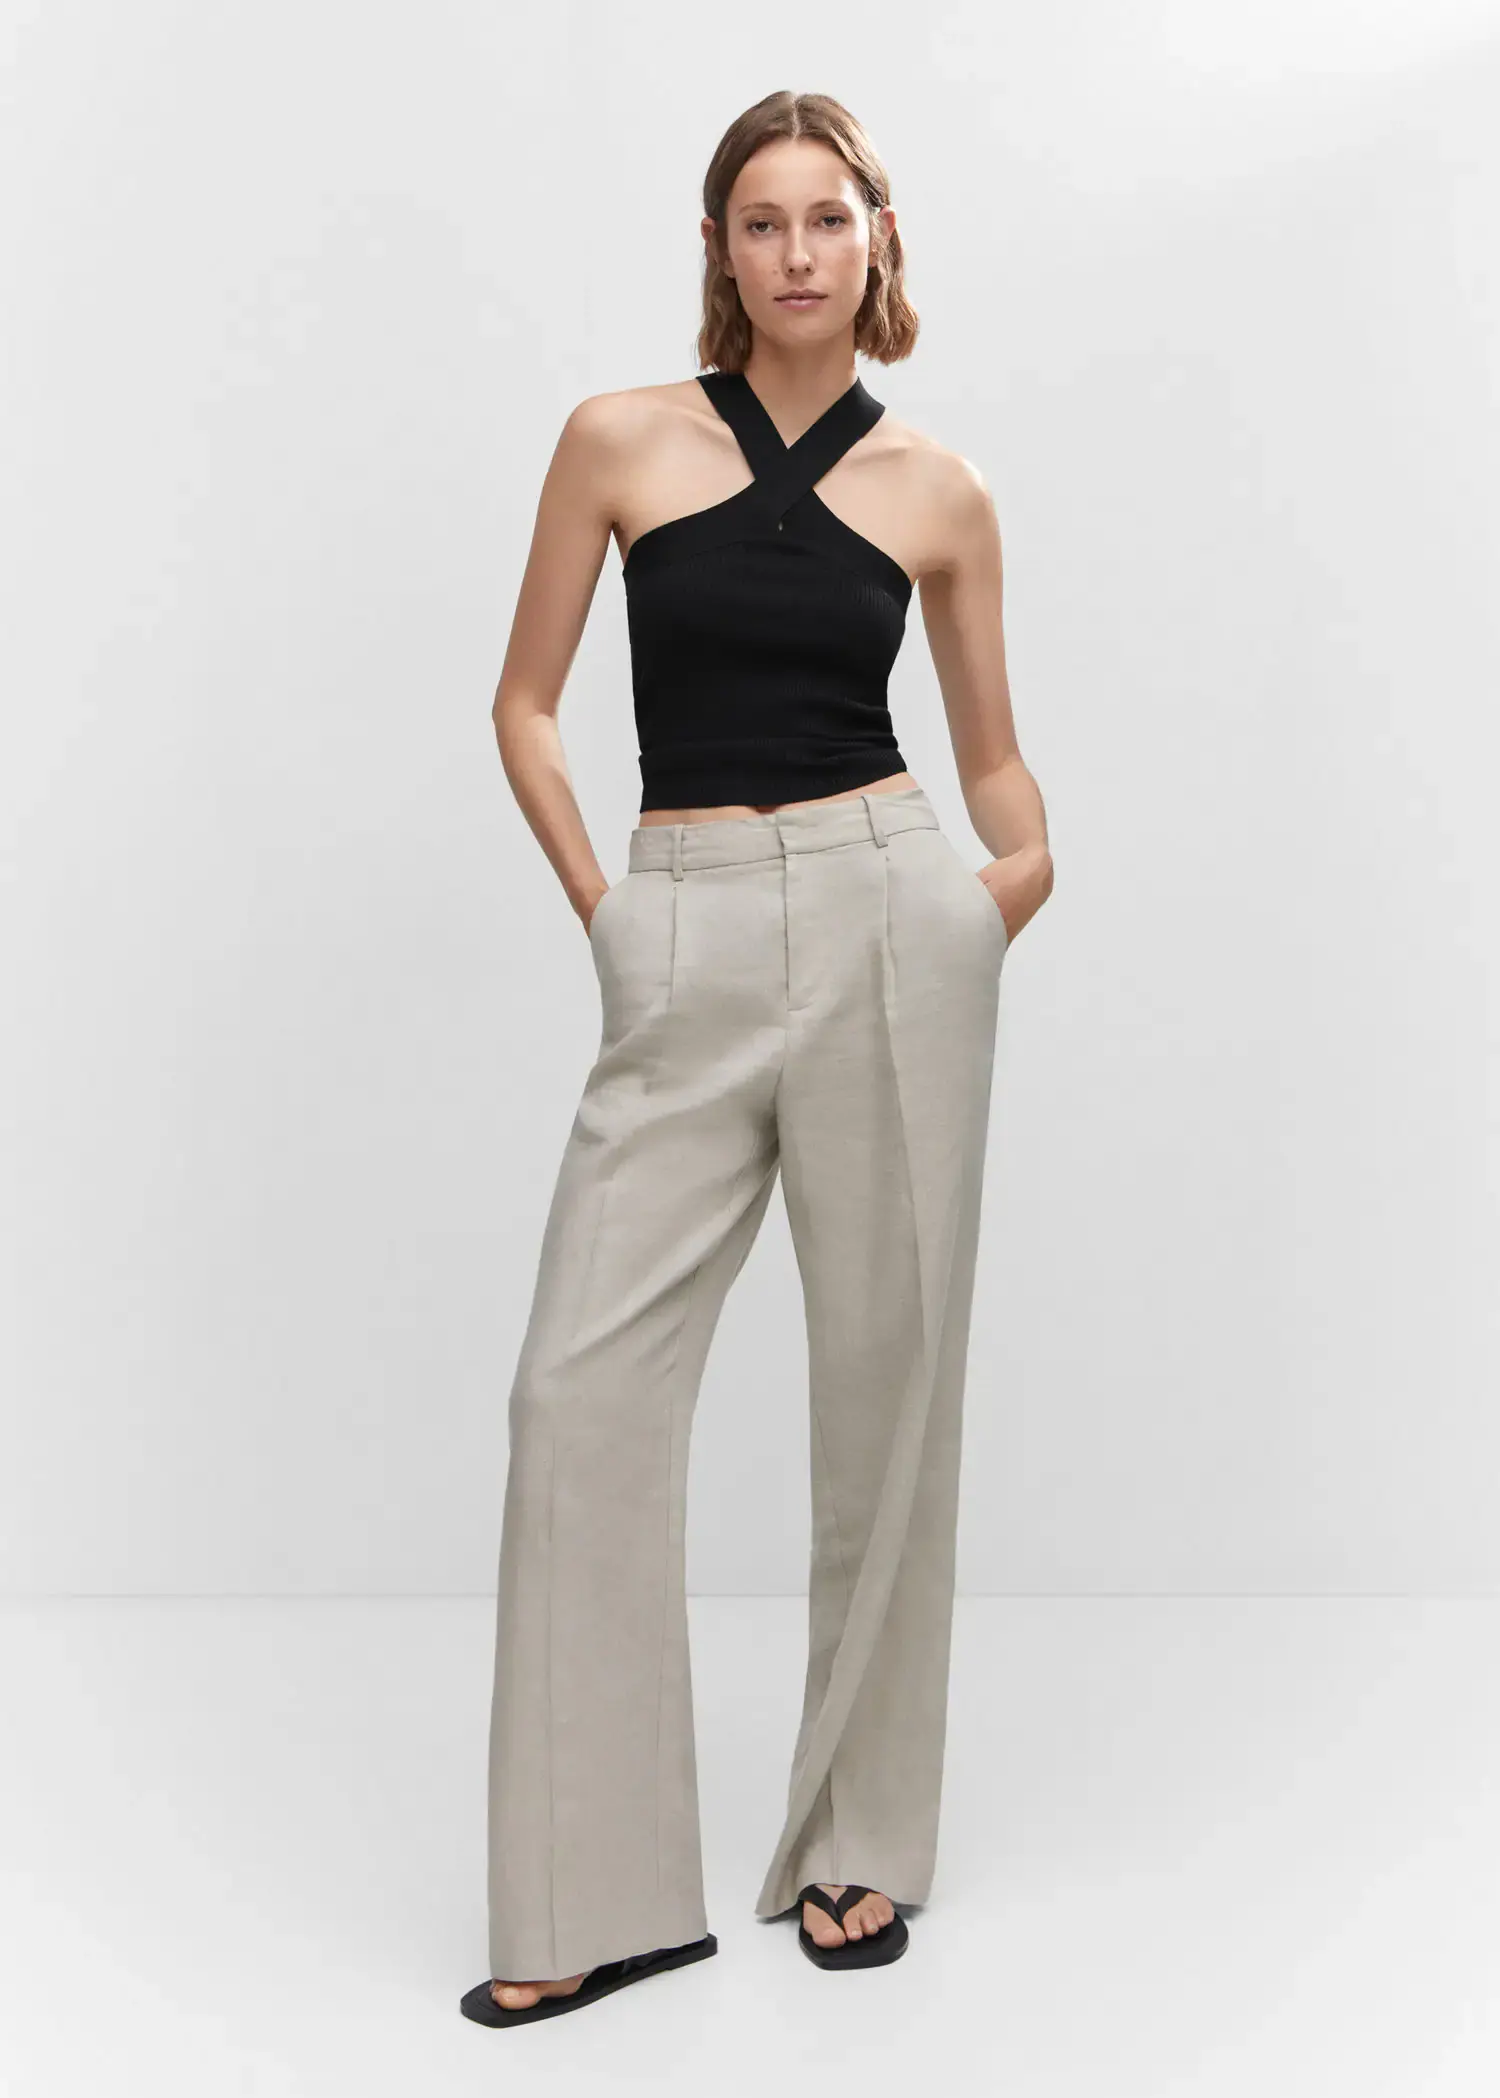 Mango Halter-neck knitted top. a woman in a black top and white pants. 